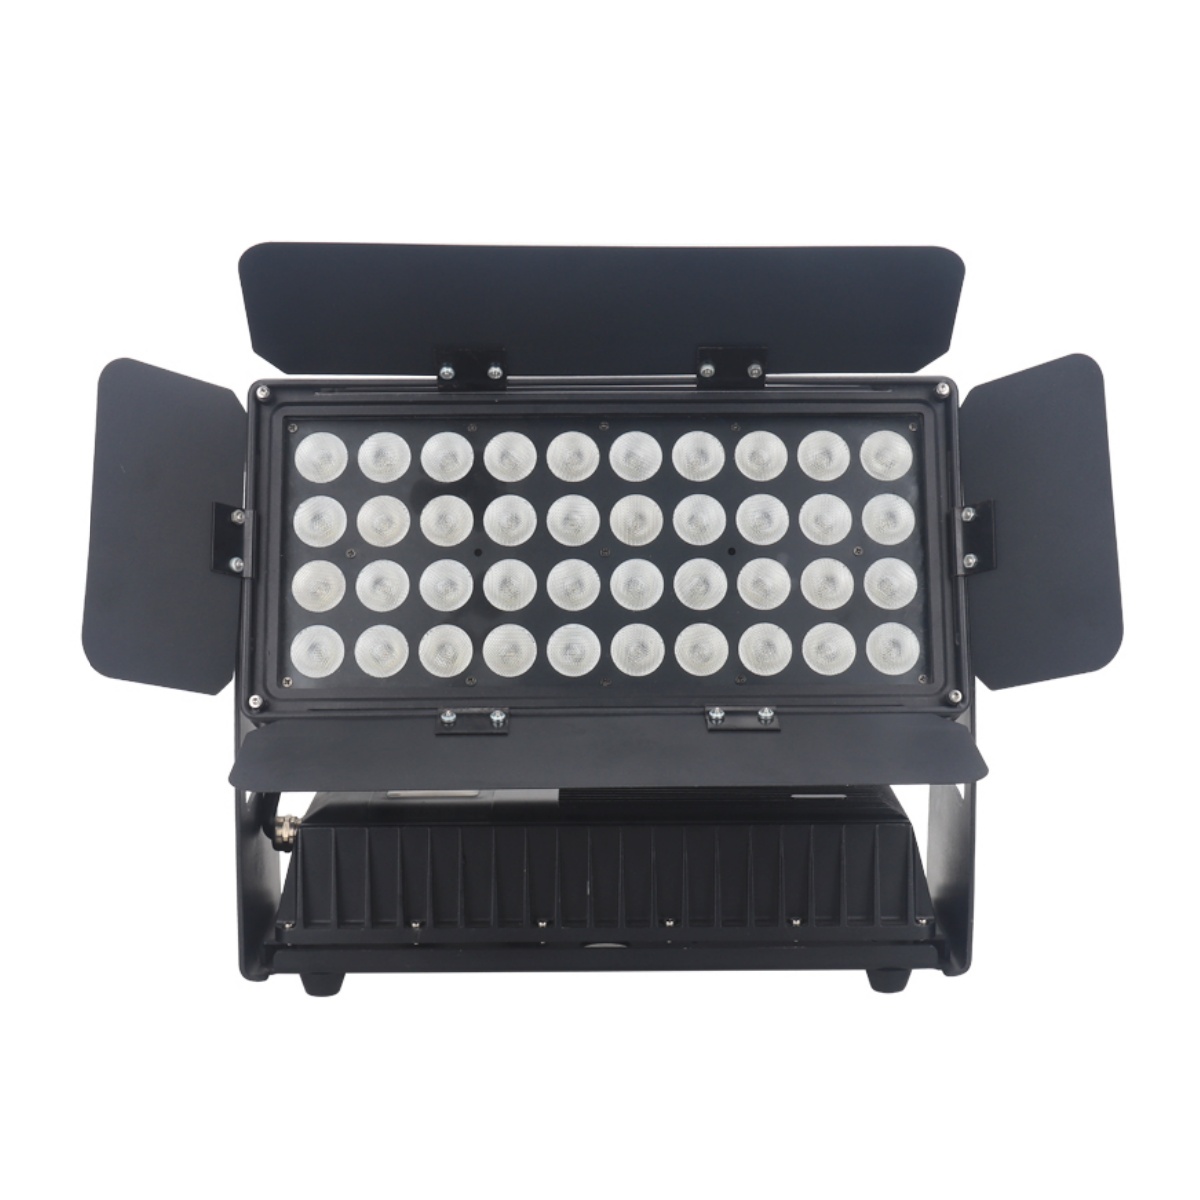 LED Wash 40x10W Waterproof Outdoor IP65 LED City Color Lights Wall Washer Stage Light